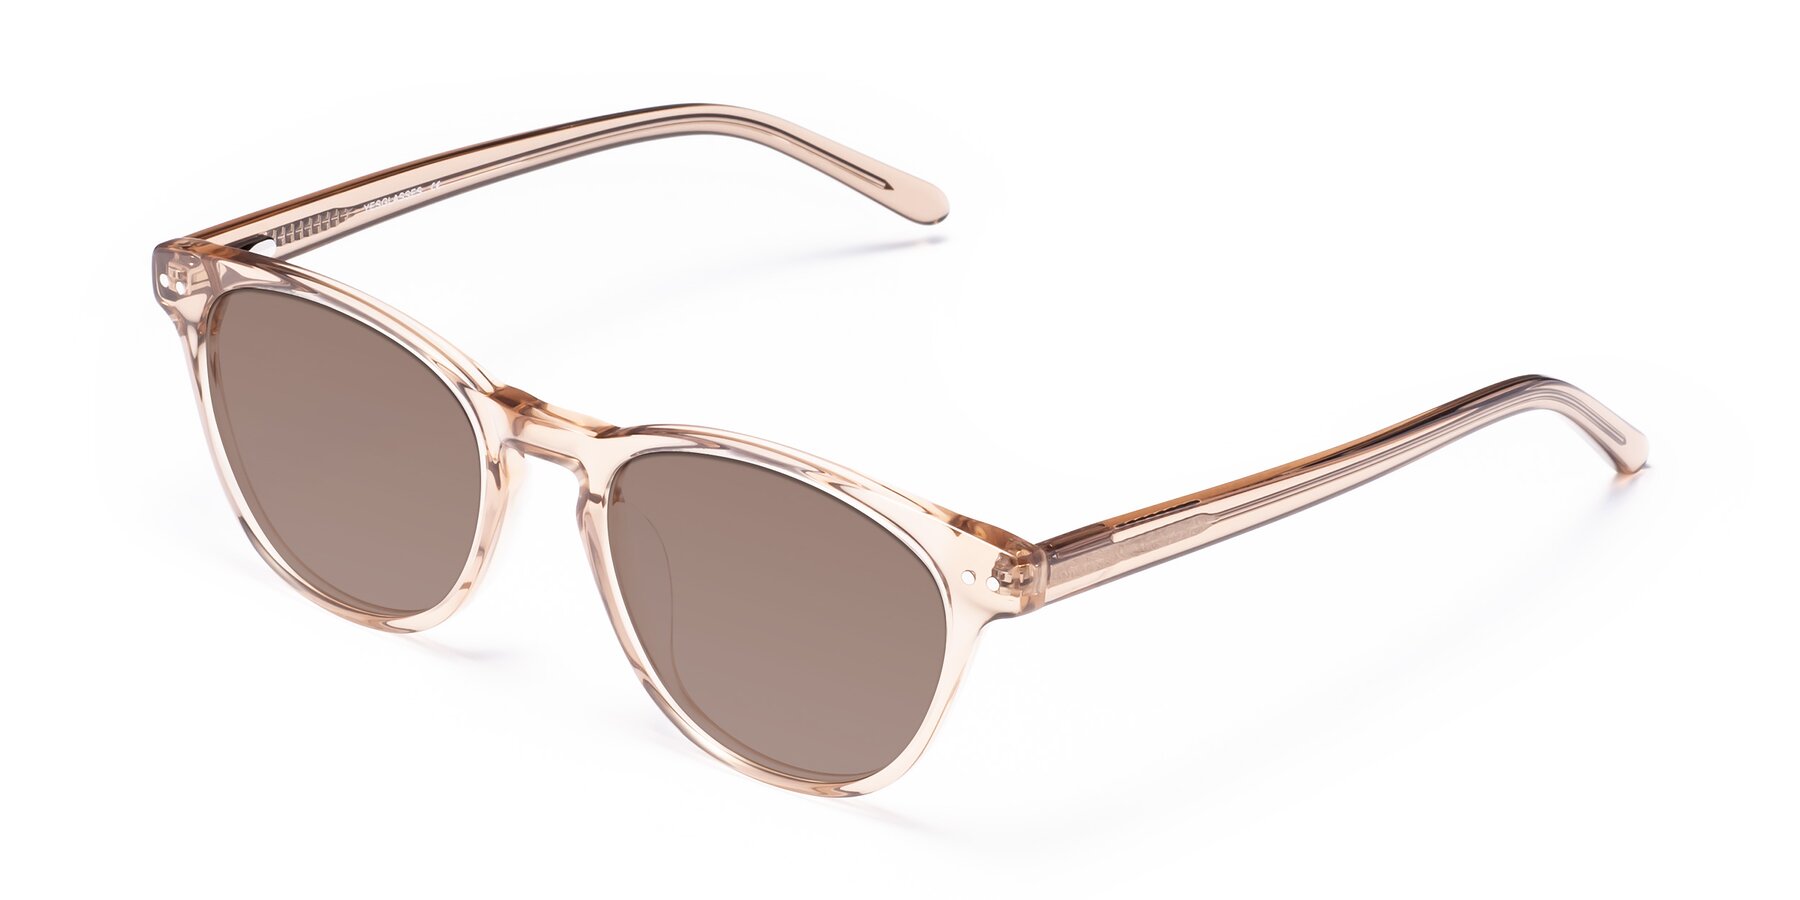 Angle of Blaze in light Brown with Medium Brown Tinted Lenses